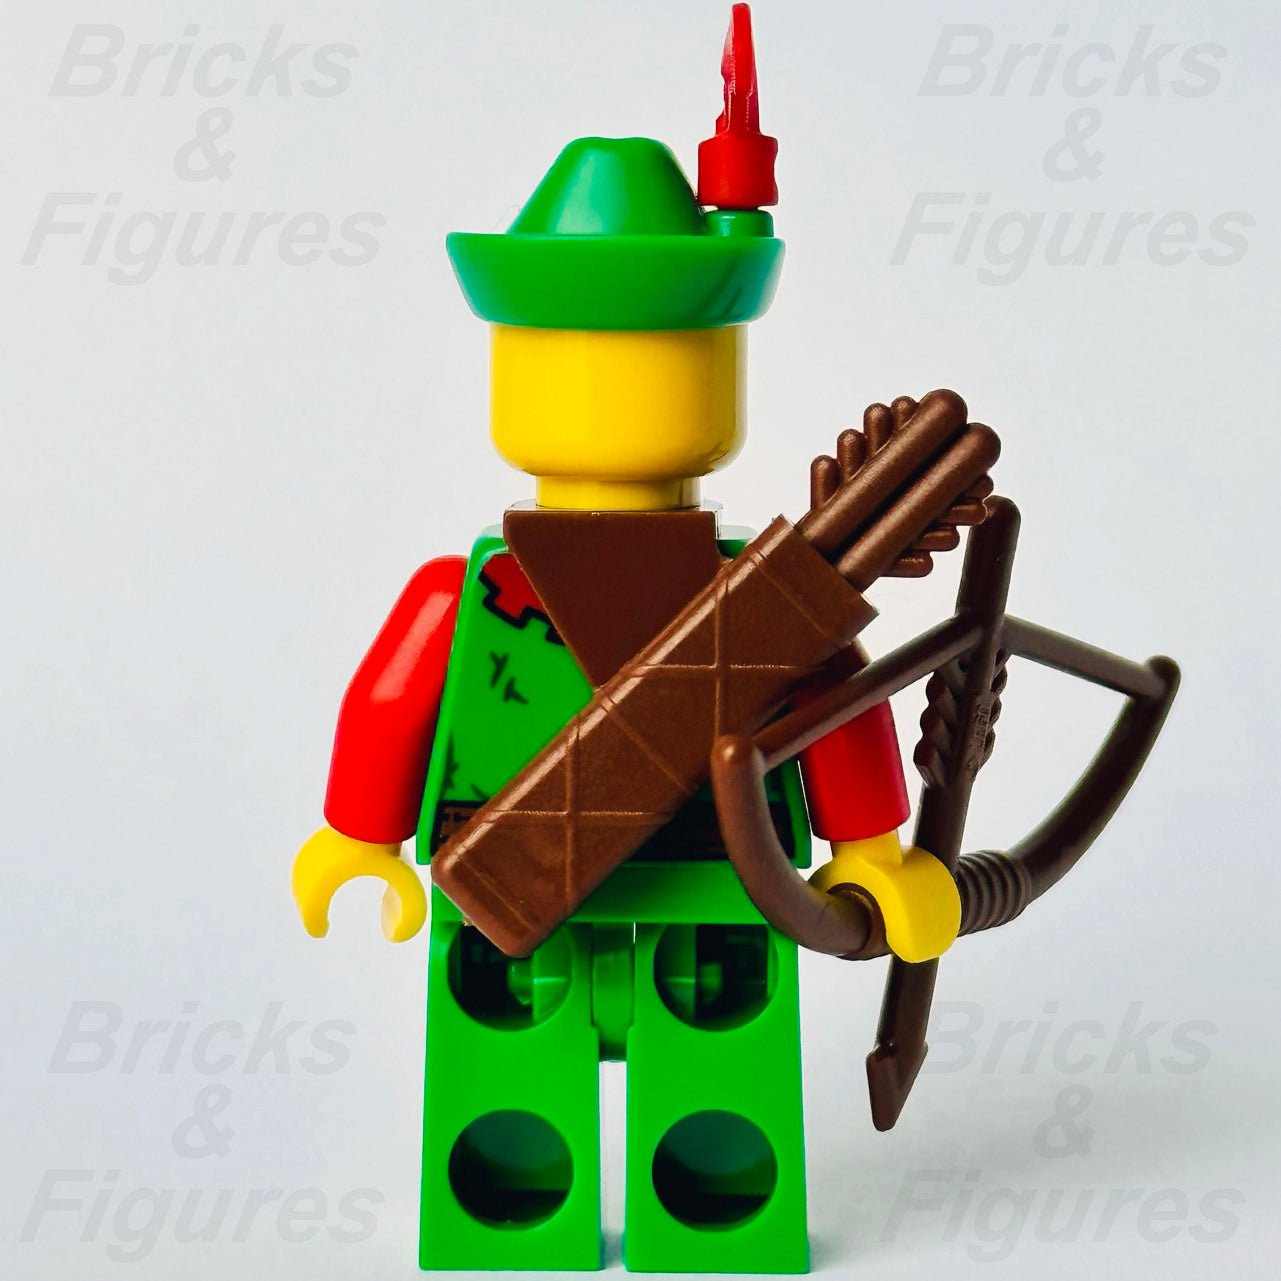 LEGO Forestman Castle Forestmen Minifigure with Bow Lion Knights 10305 cas571 - Bricks & Figures